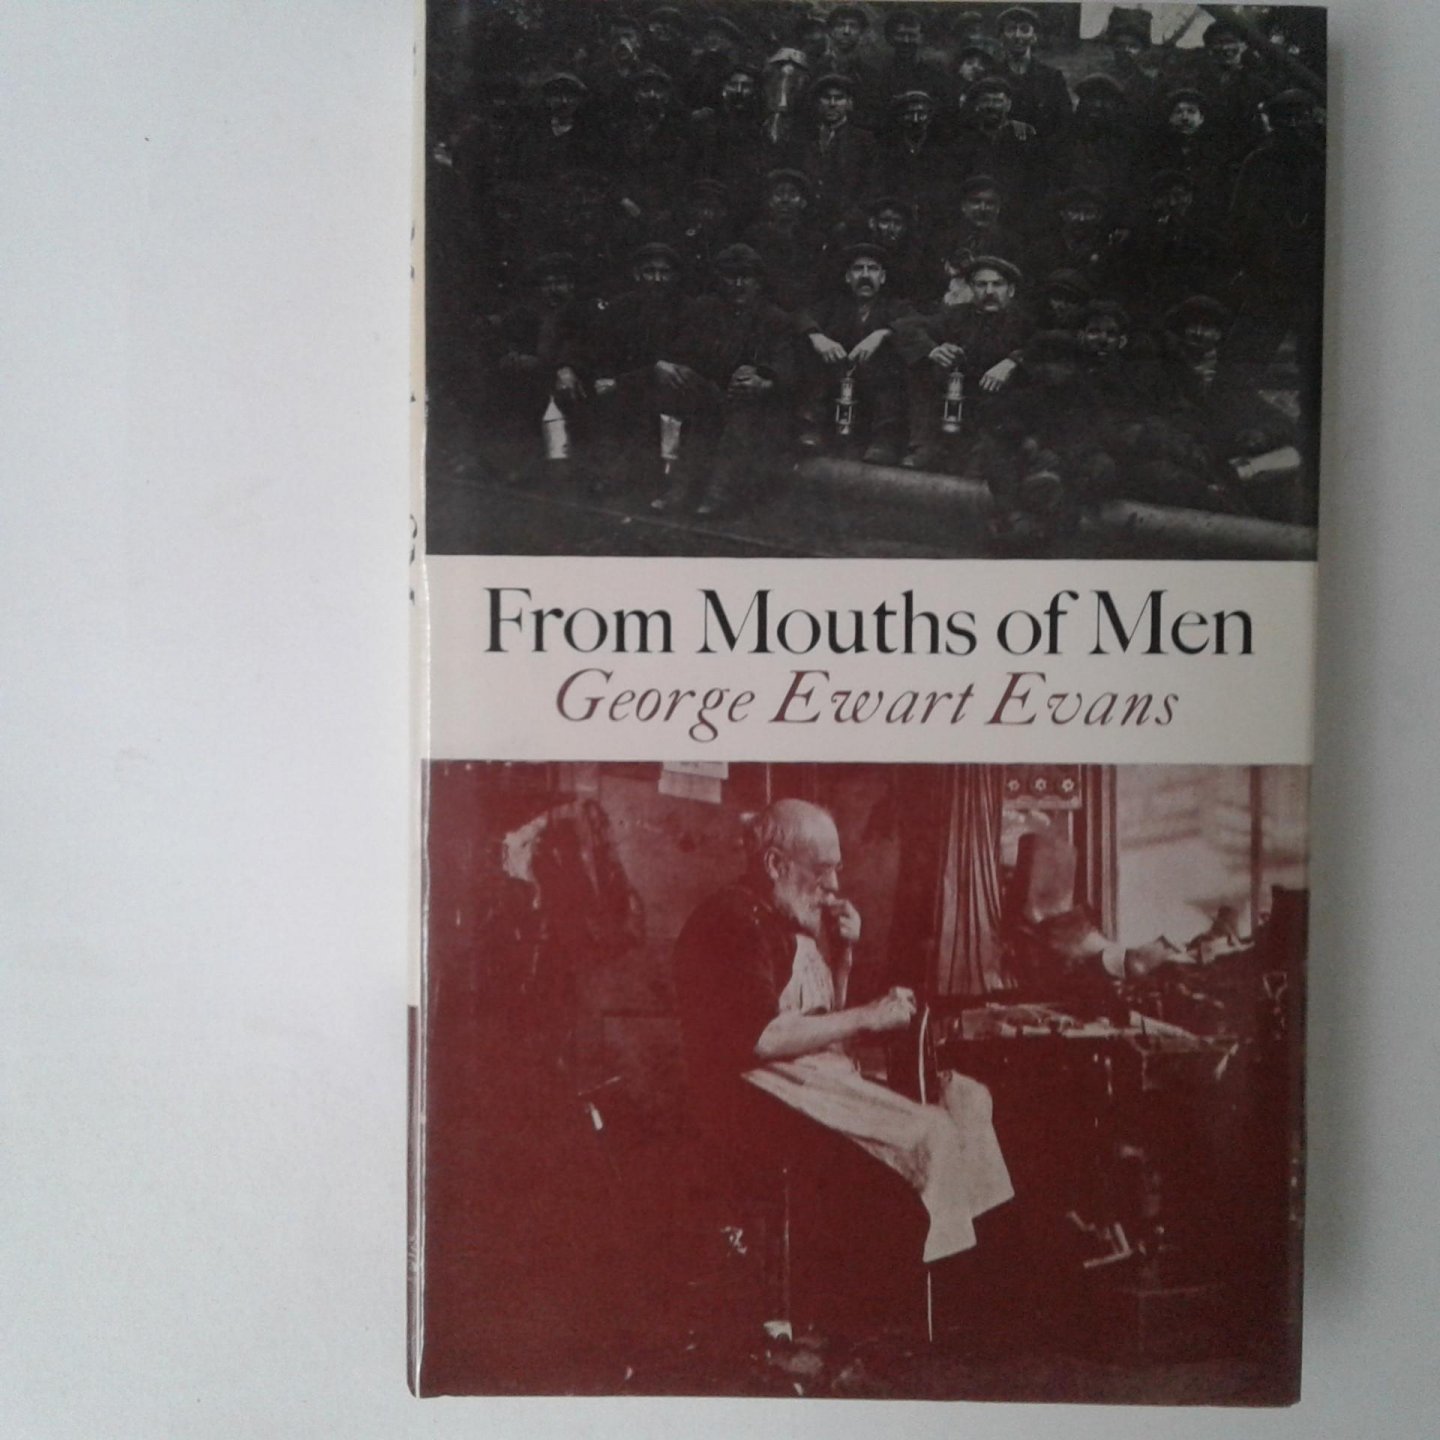 Evans, George Ewart - From Mouths of Men